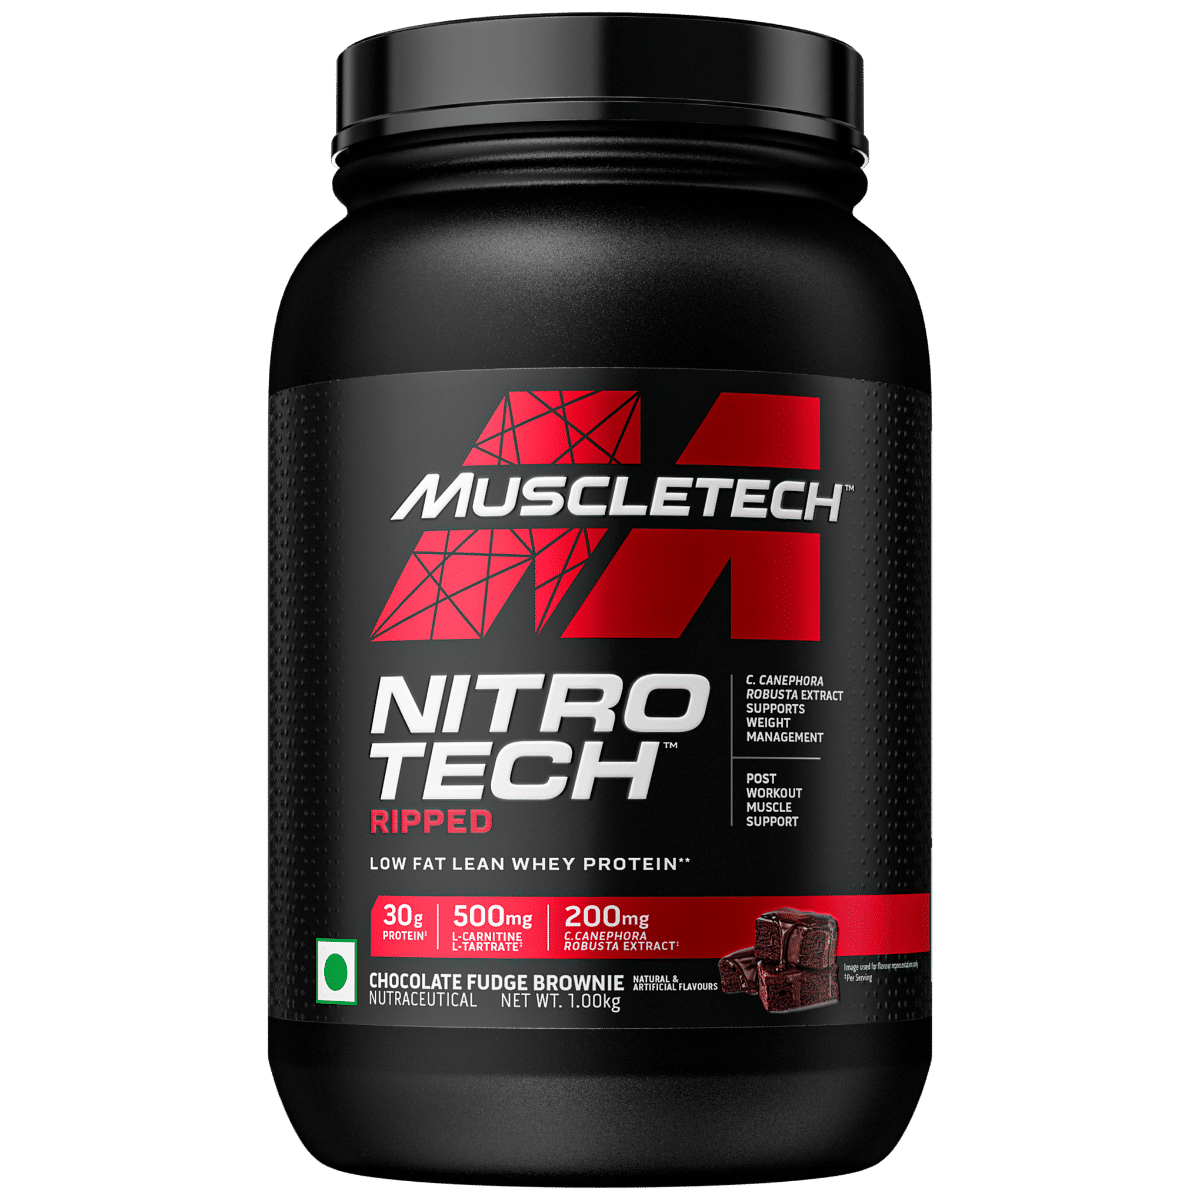 Buy Muscletech Nitrotech Ripped Low Fat Whey Protein Chocolate Fudge Brownie Flavour Powder, 1 kg Online